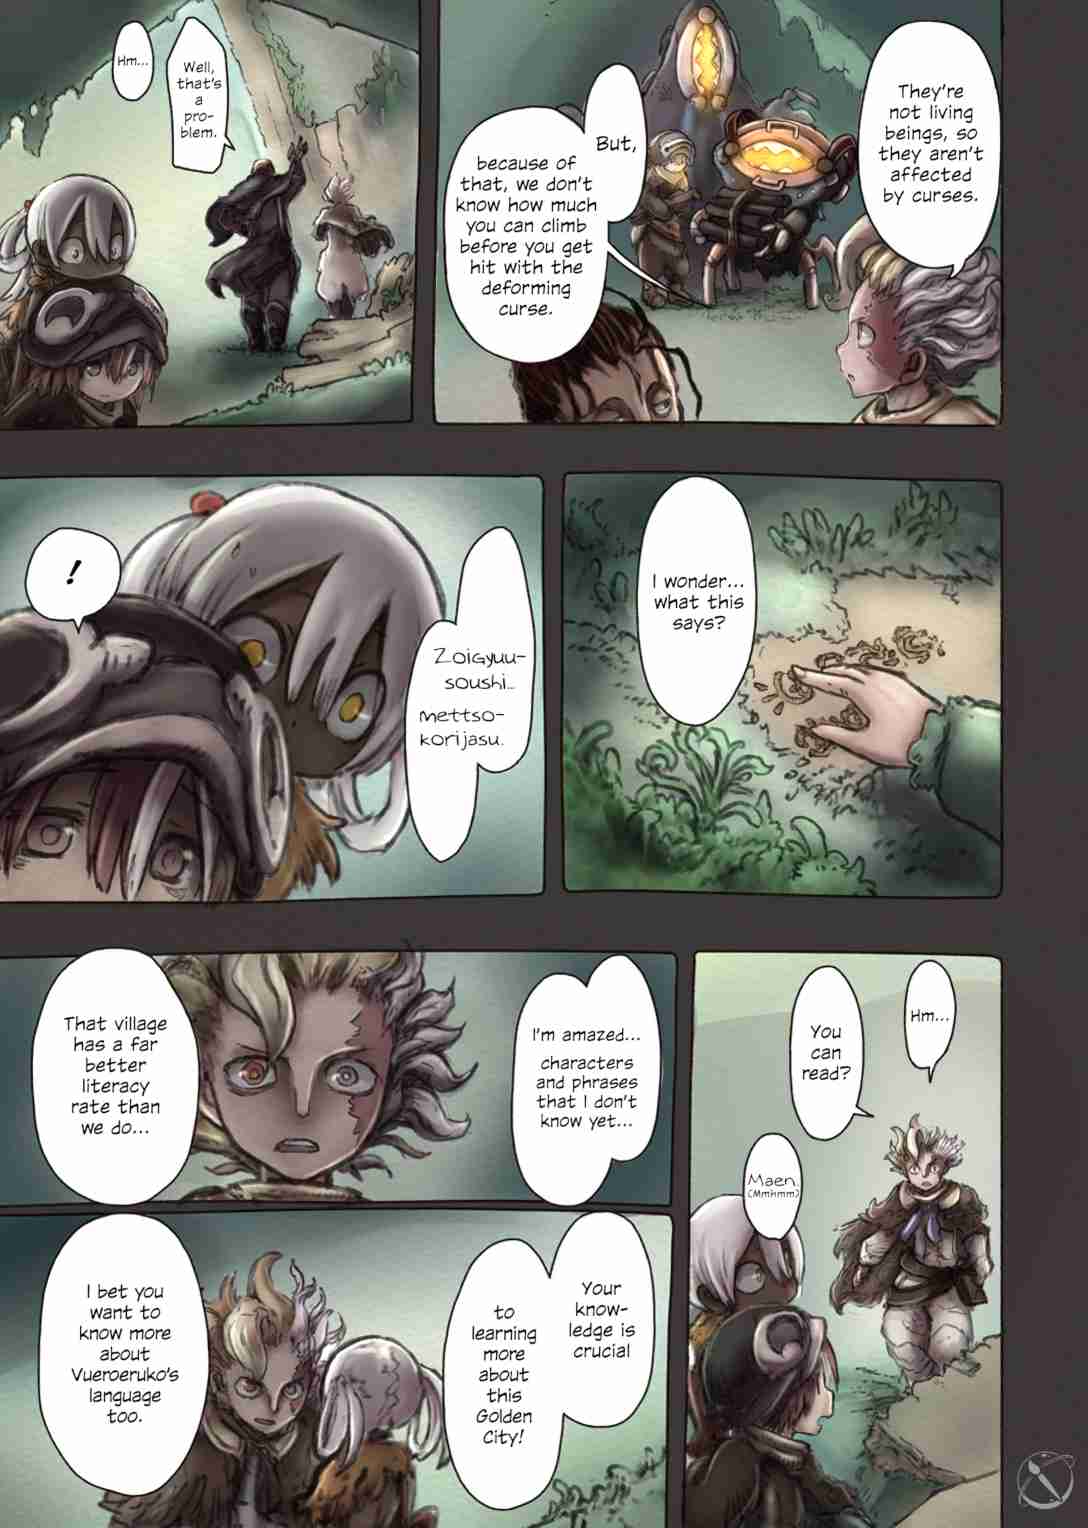 Made in Abyss (Fan Colored) Vol. 8 Ch. 49 The Golden City [Colored]